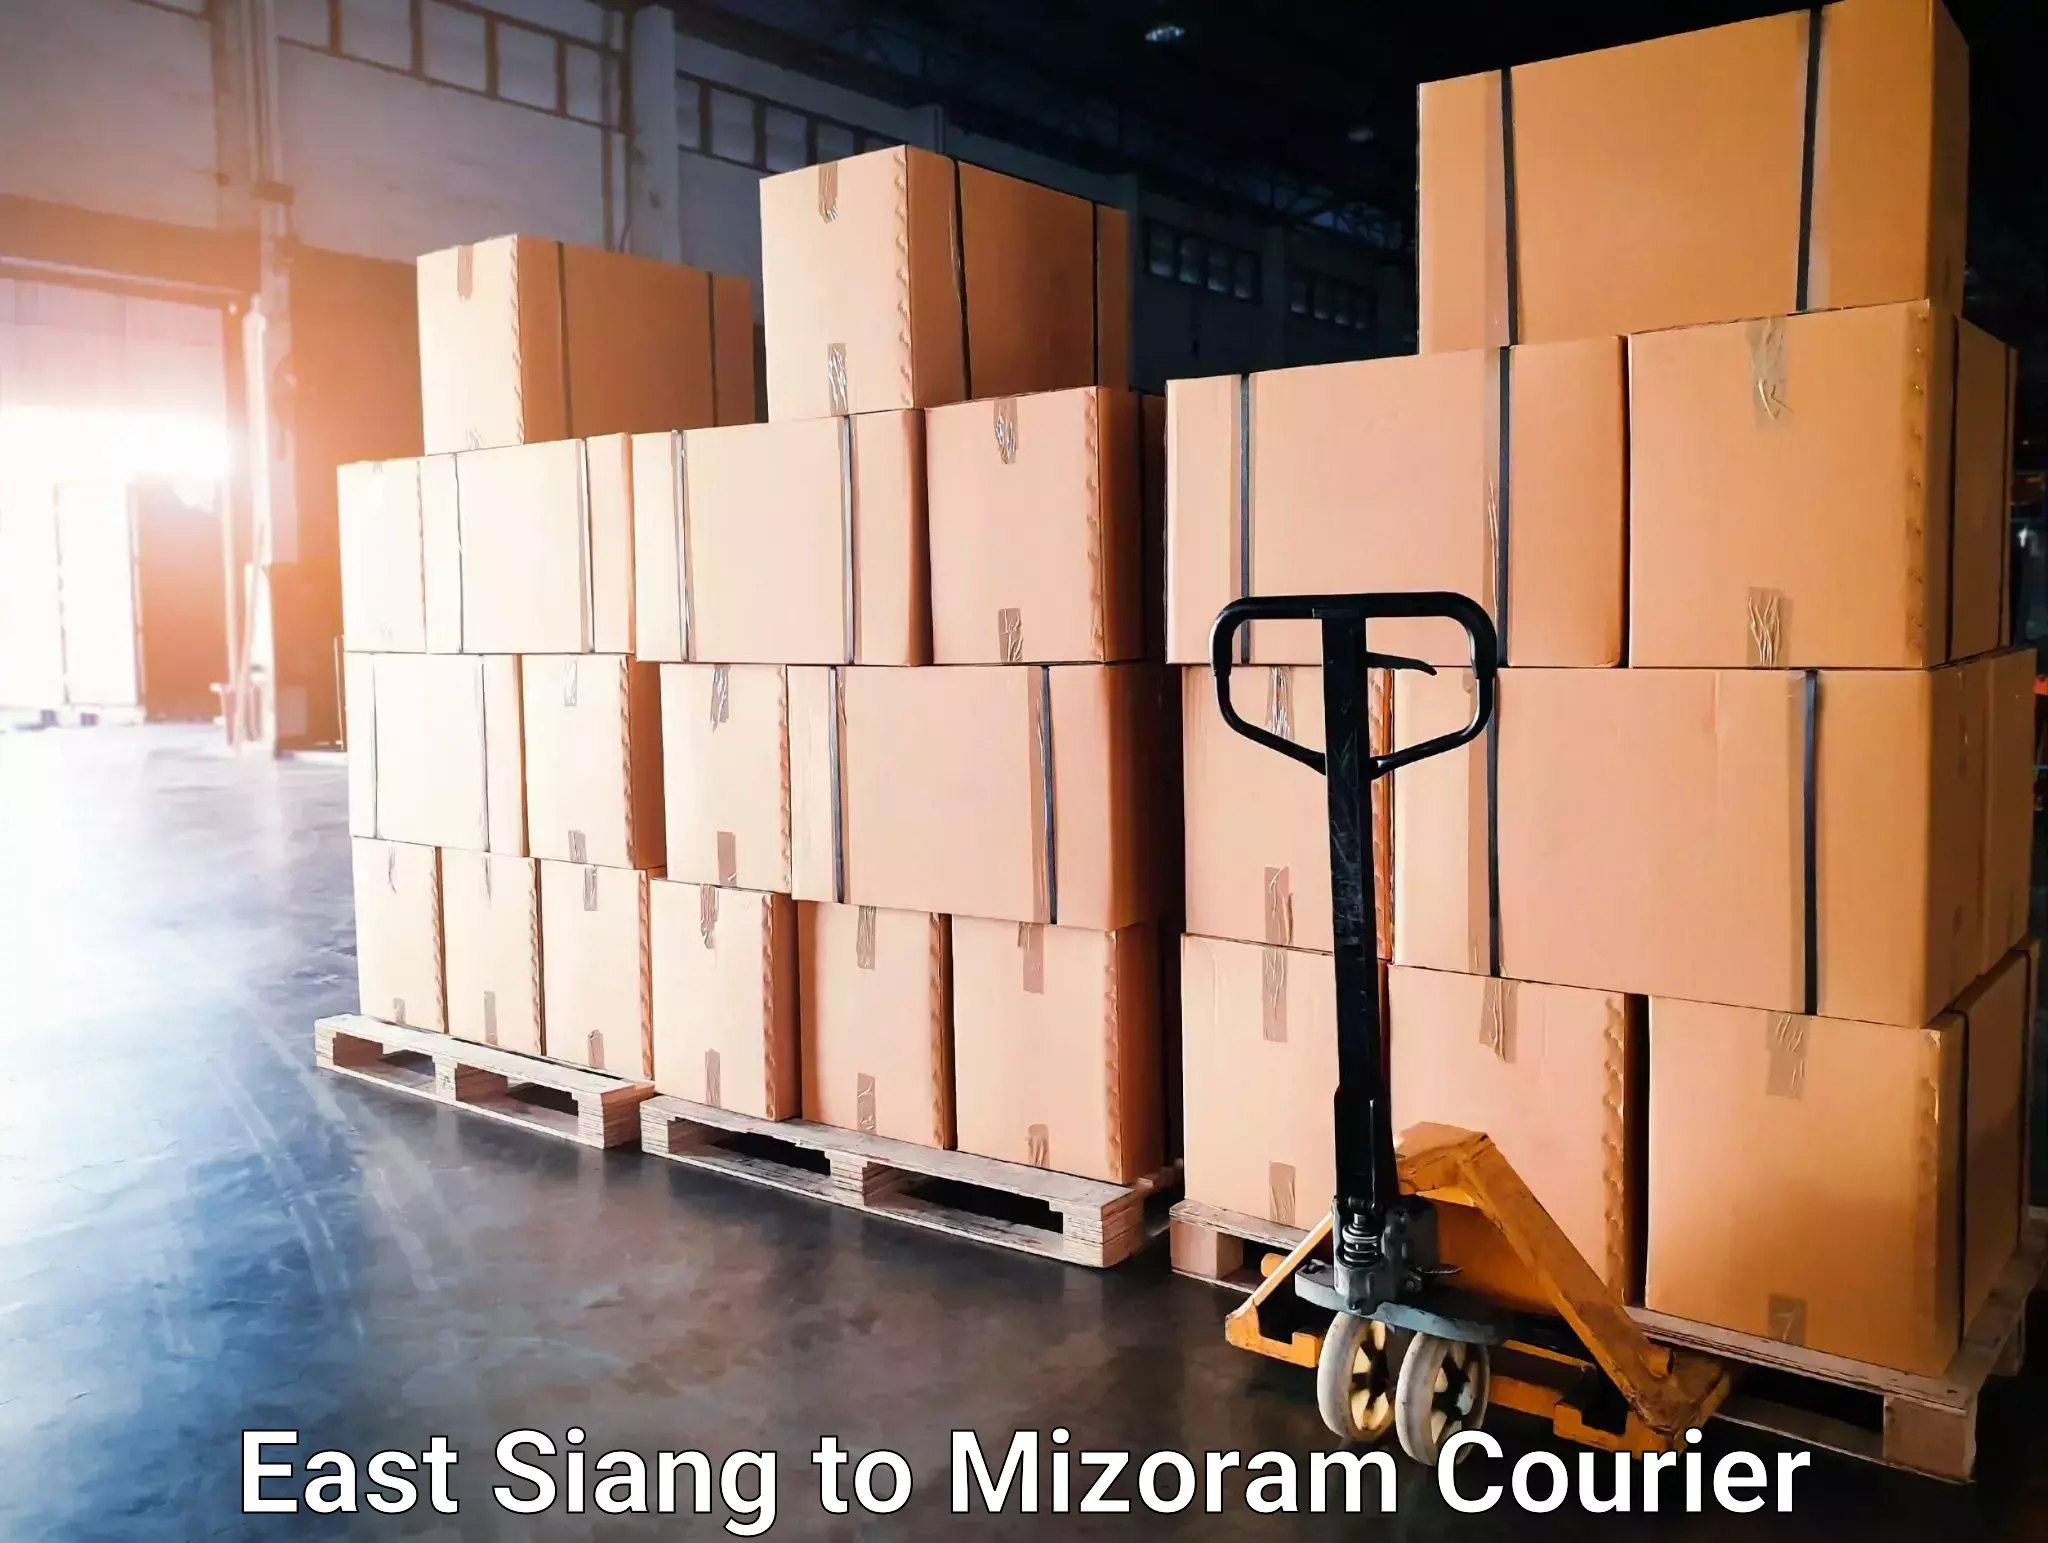 Nationwide courier service East Siang to Mizoram